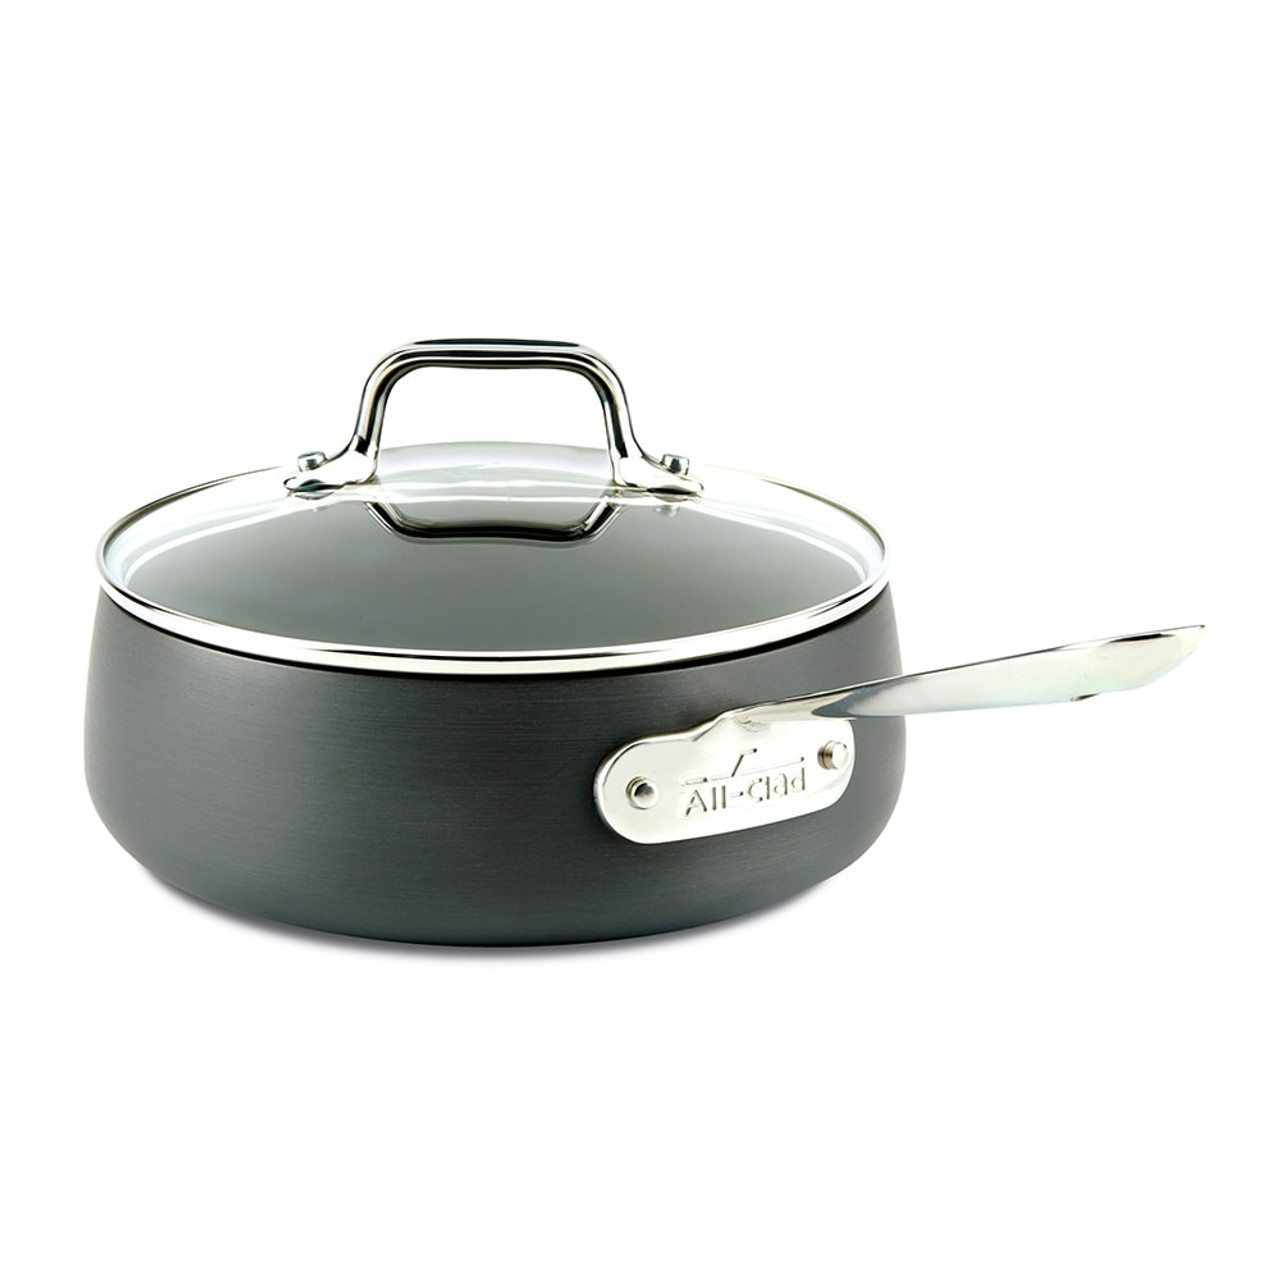 https://cdn11.bigcommerce.com/s-hccytny0od/images/stencil/1280x1280/products/518/8400/all-clad-ha1-sauce-pan-2-5qt__46407.1595949308.jpg?c=2?imbypass=on